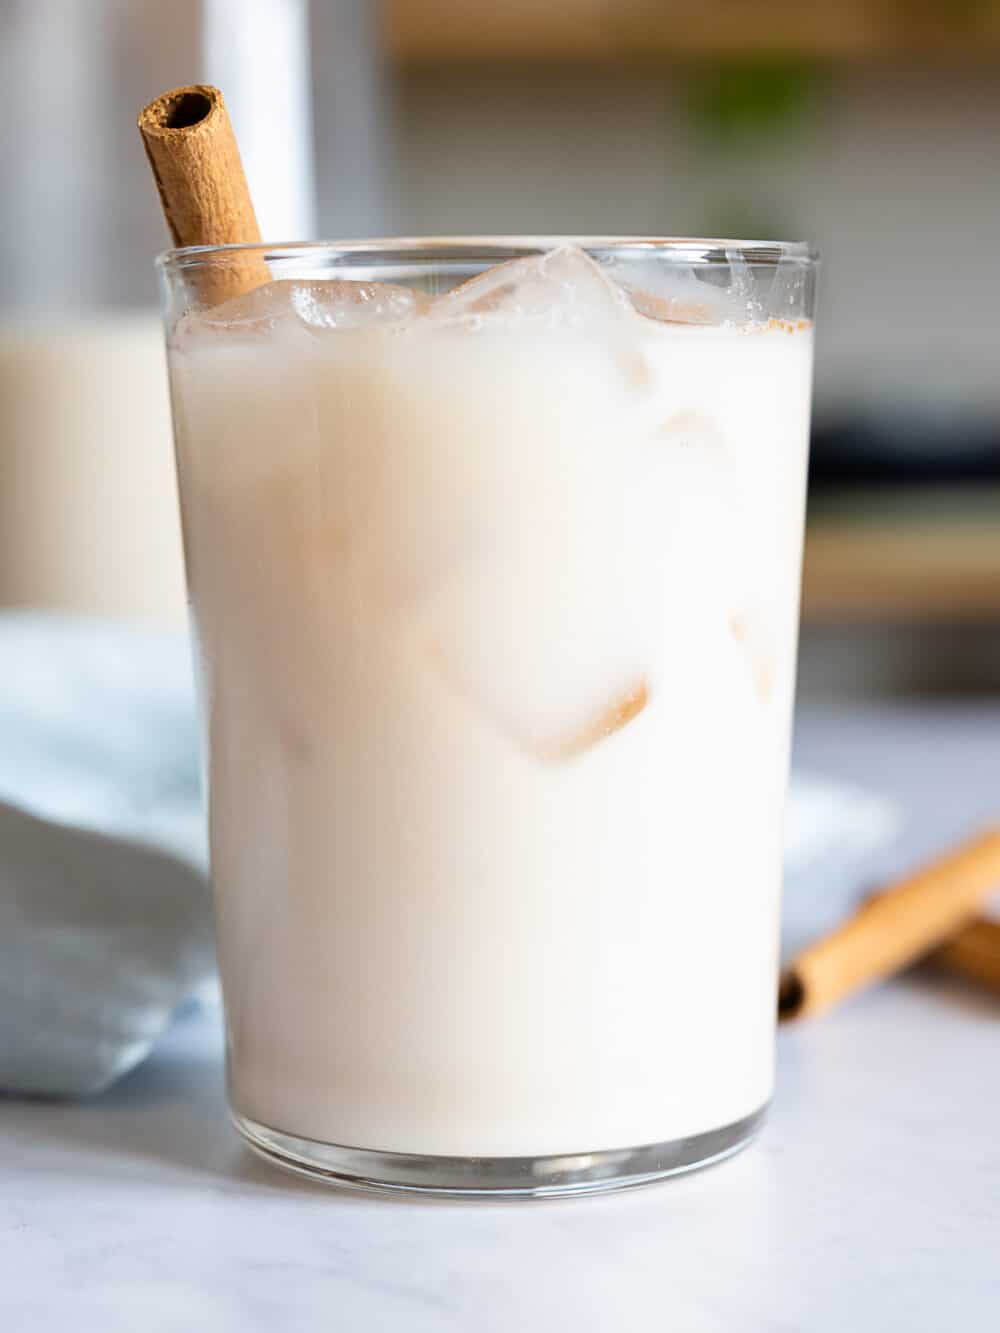 Agua de Horchata in a glass with ice cubes and cinnamon stick sticking out.